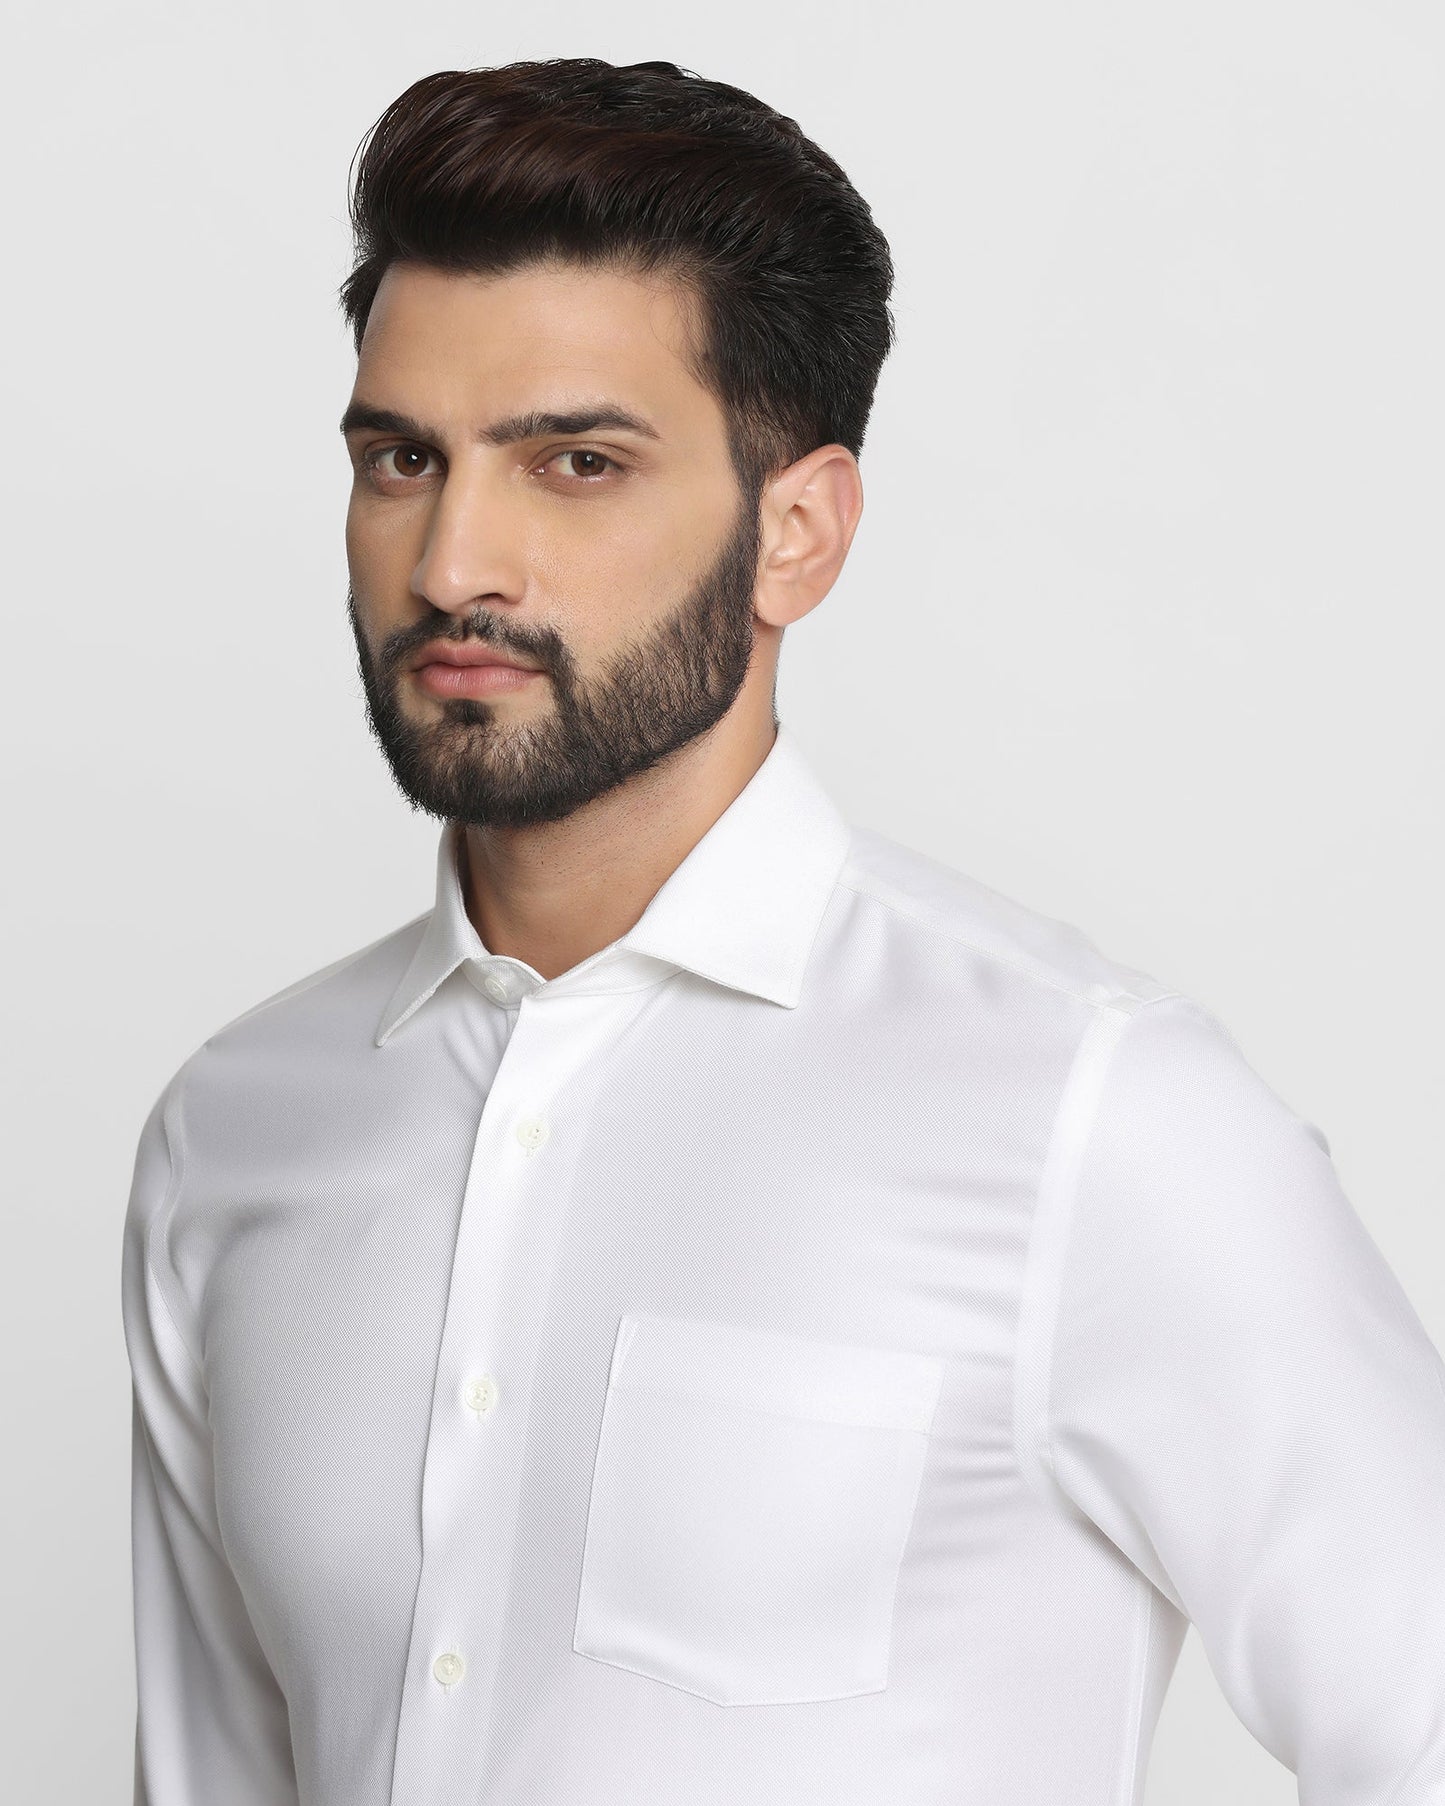 Solid formal shirt in white